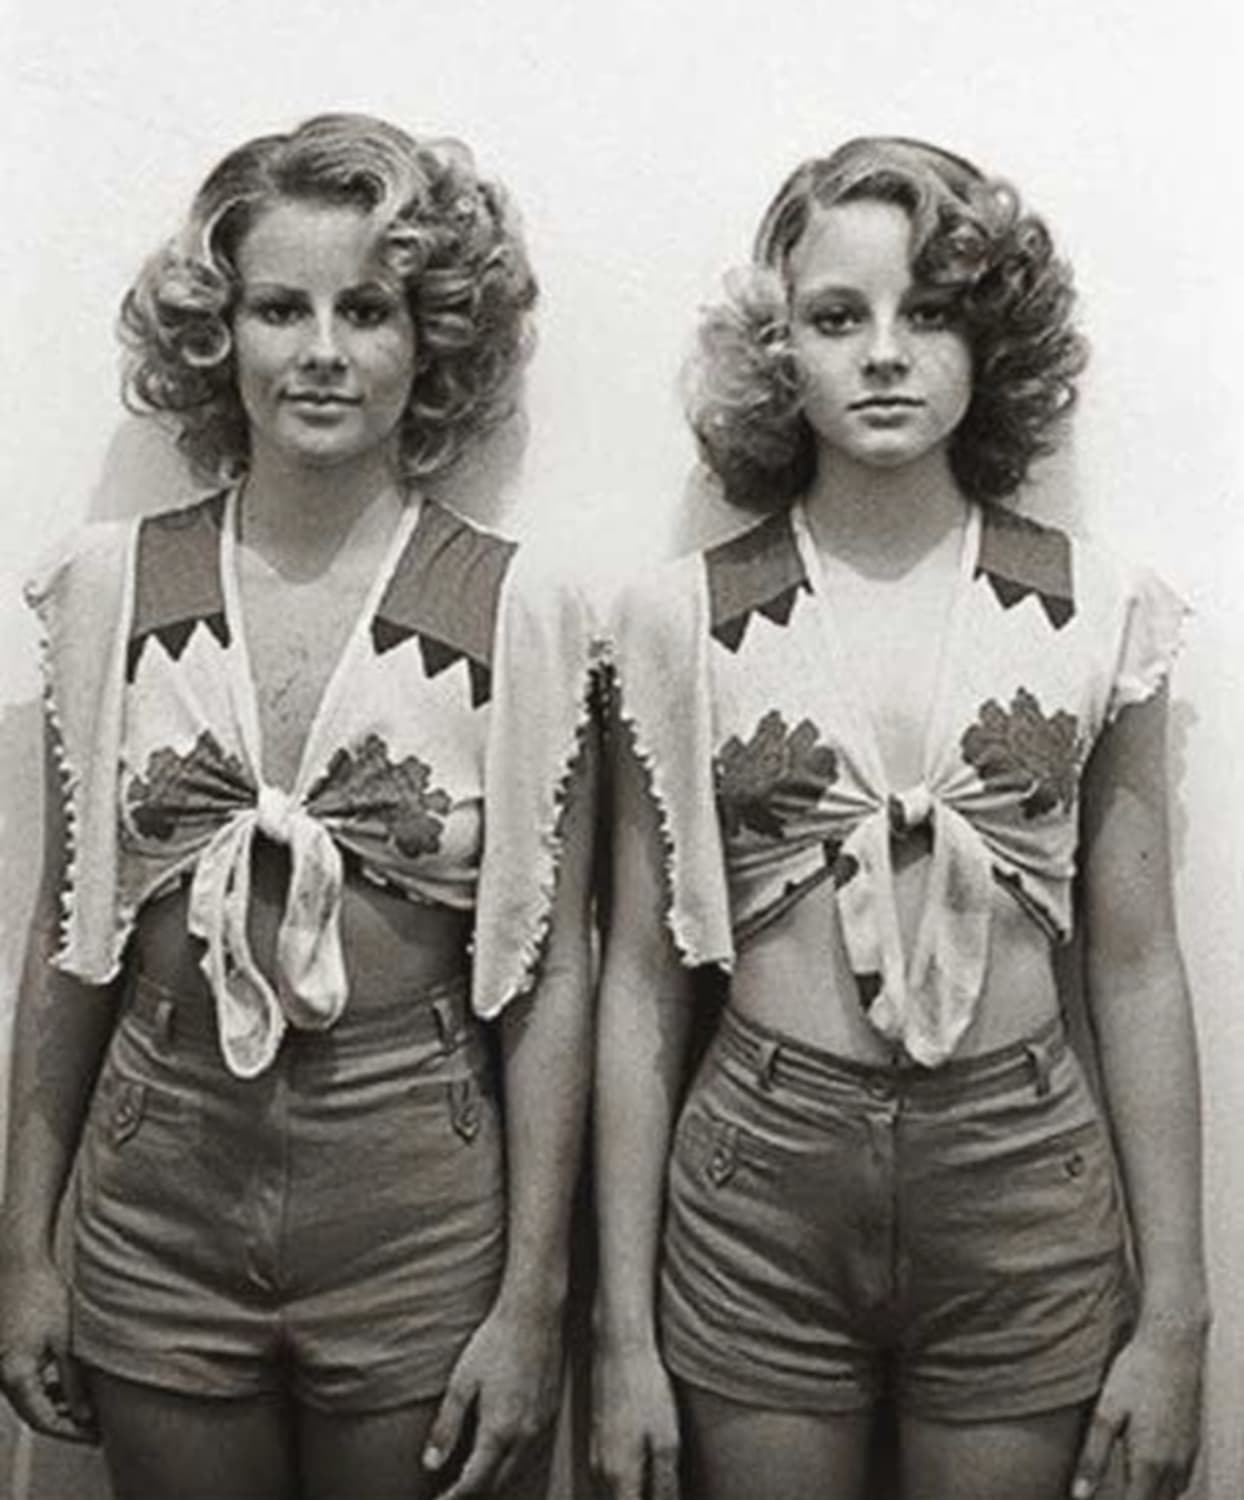 12 year-old Jodie Foster (right) and her 19 year-old sister Connie, who stood in for her more explicit scenes in the film "Taxi Driver" (1976) (More info in the comments)